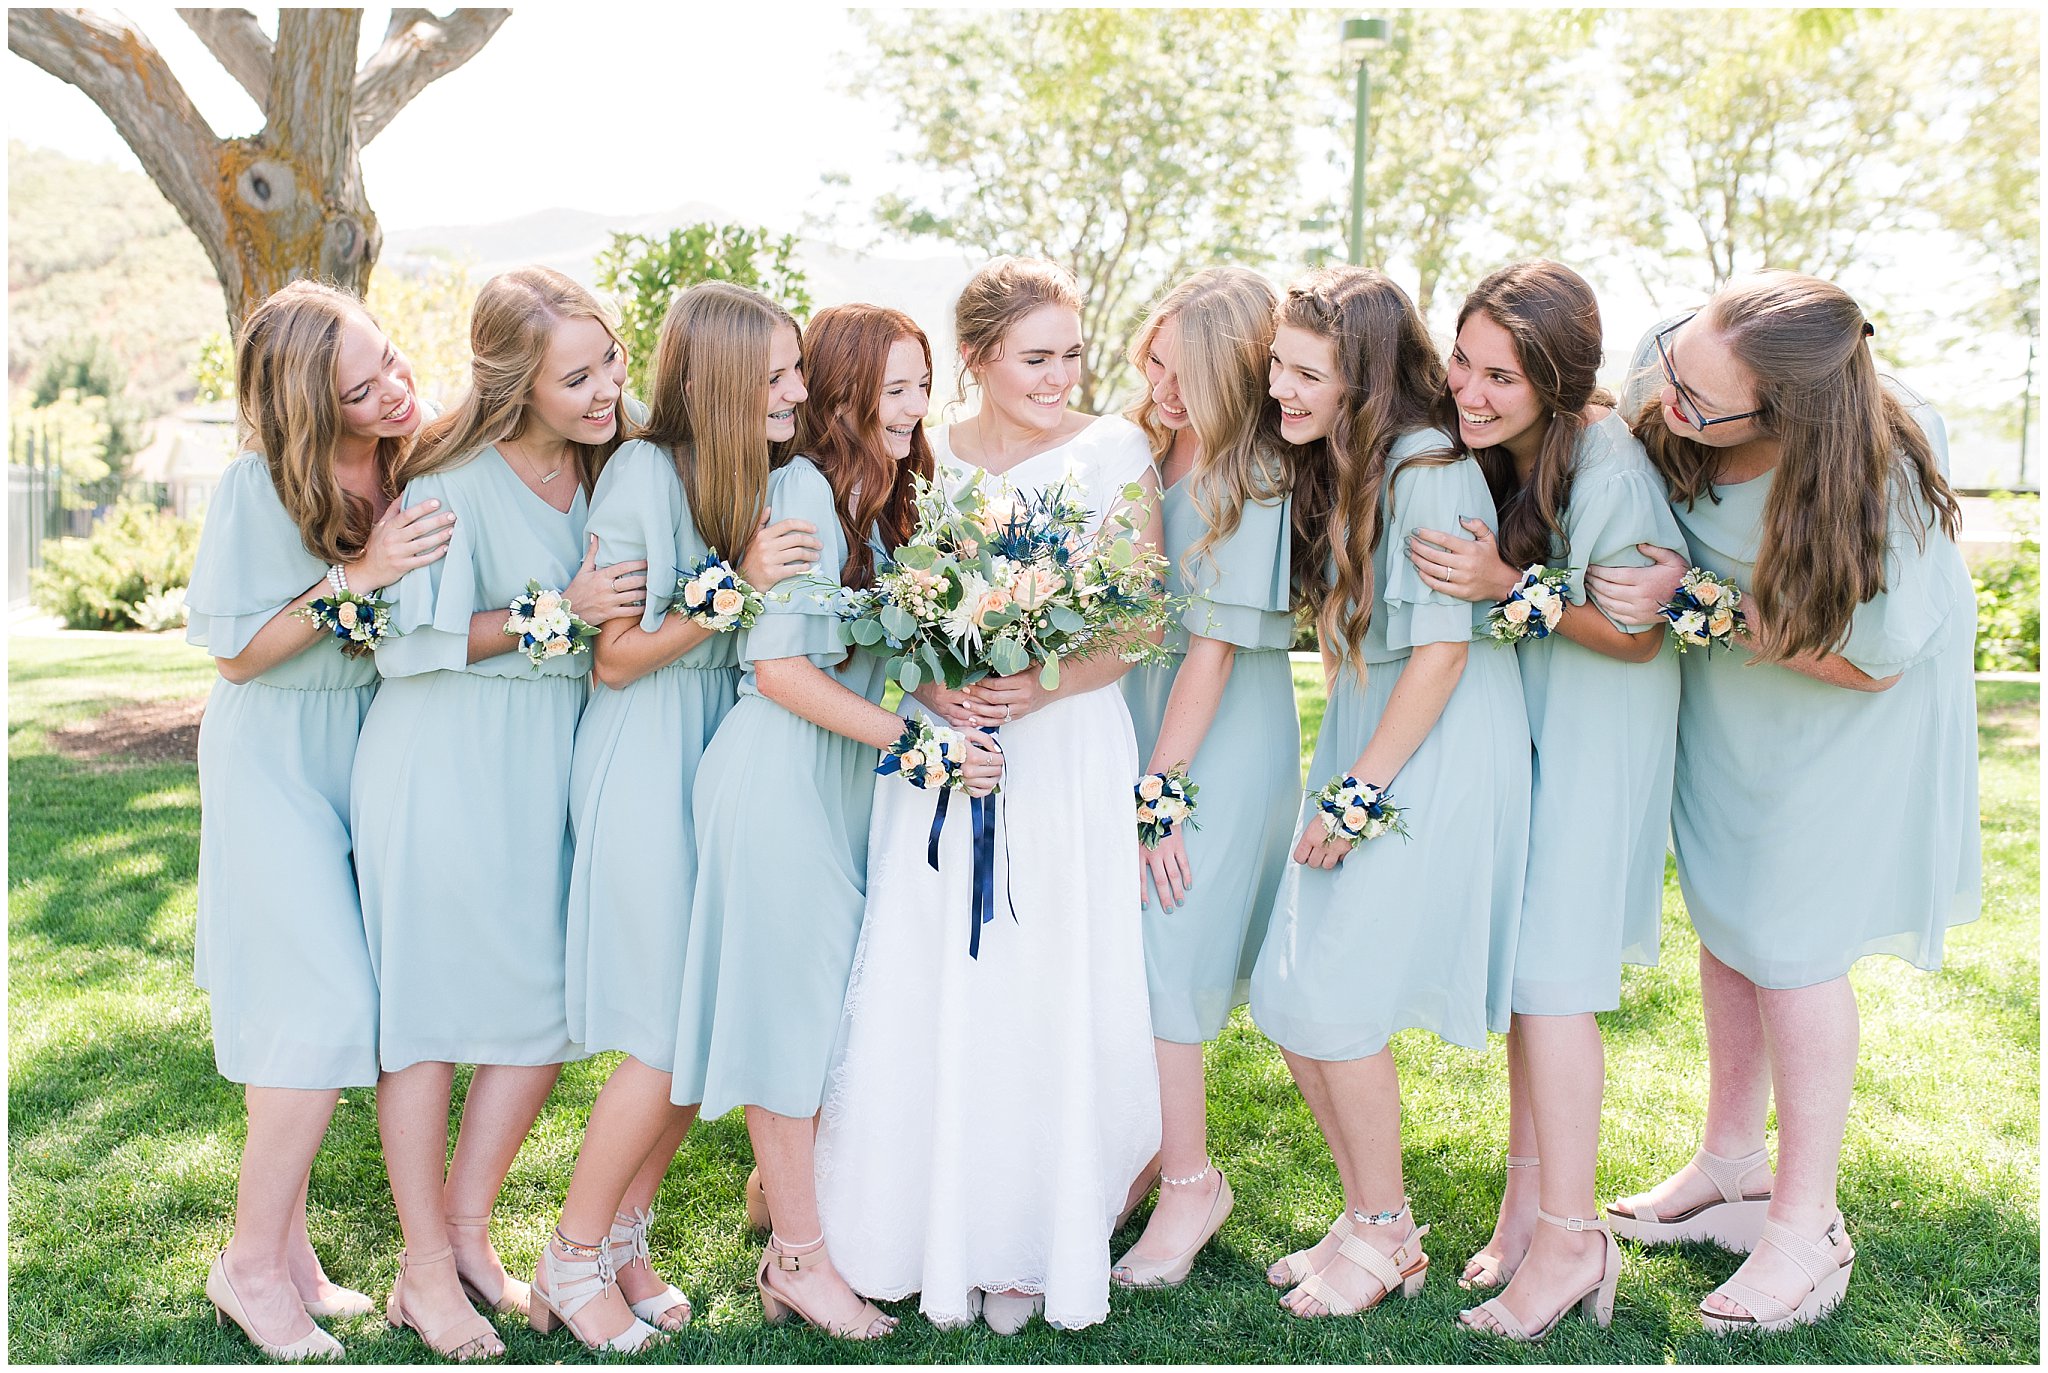 Bride with bridesmaids wearing sage dresses with corsages on wrists | Bountiful Temple Wedding and Oak Hills Reception | Jessie and Dallin Photography